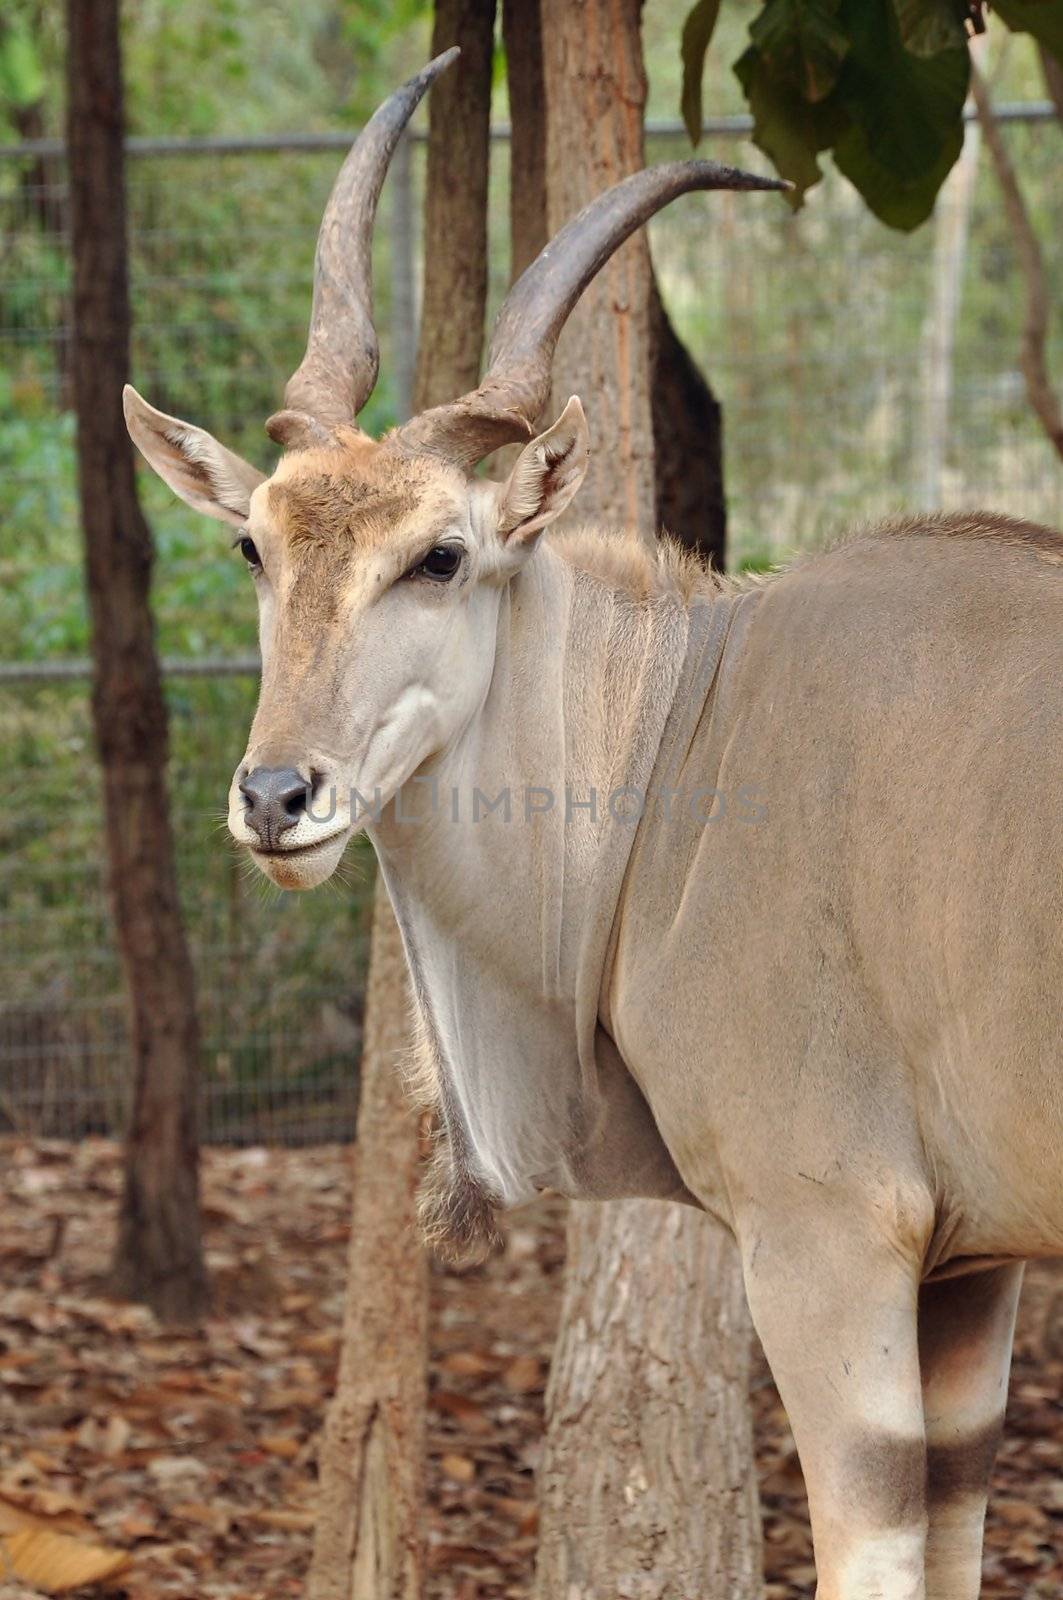 The elands are spiral-horned antelopes belonging to the Bovid tribe of Tragelaphini.